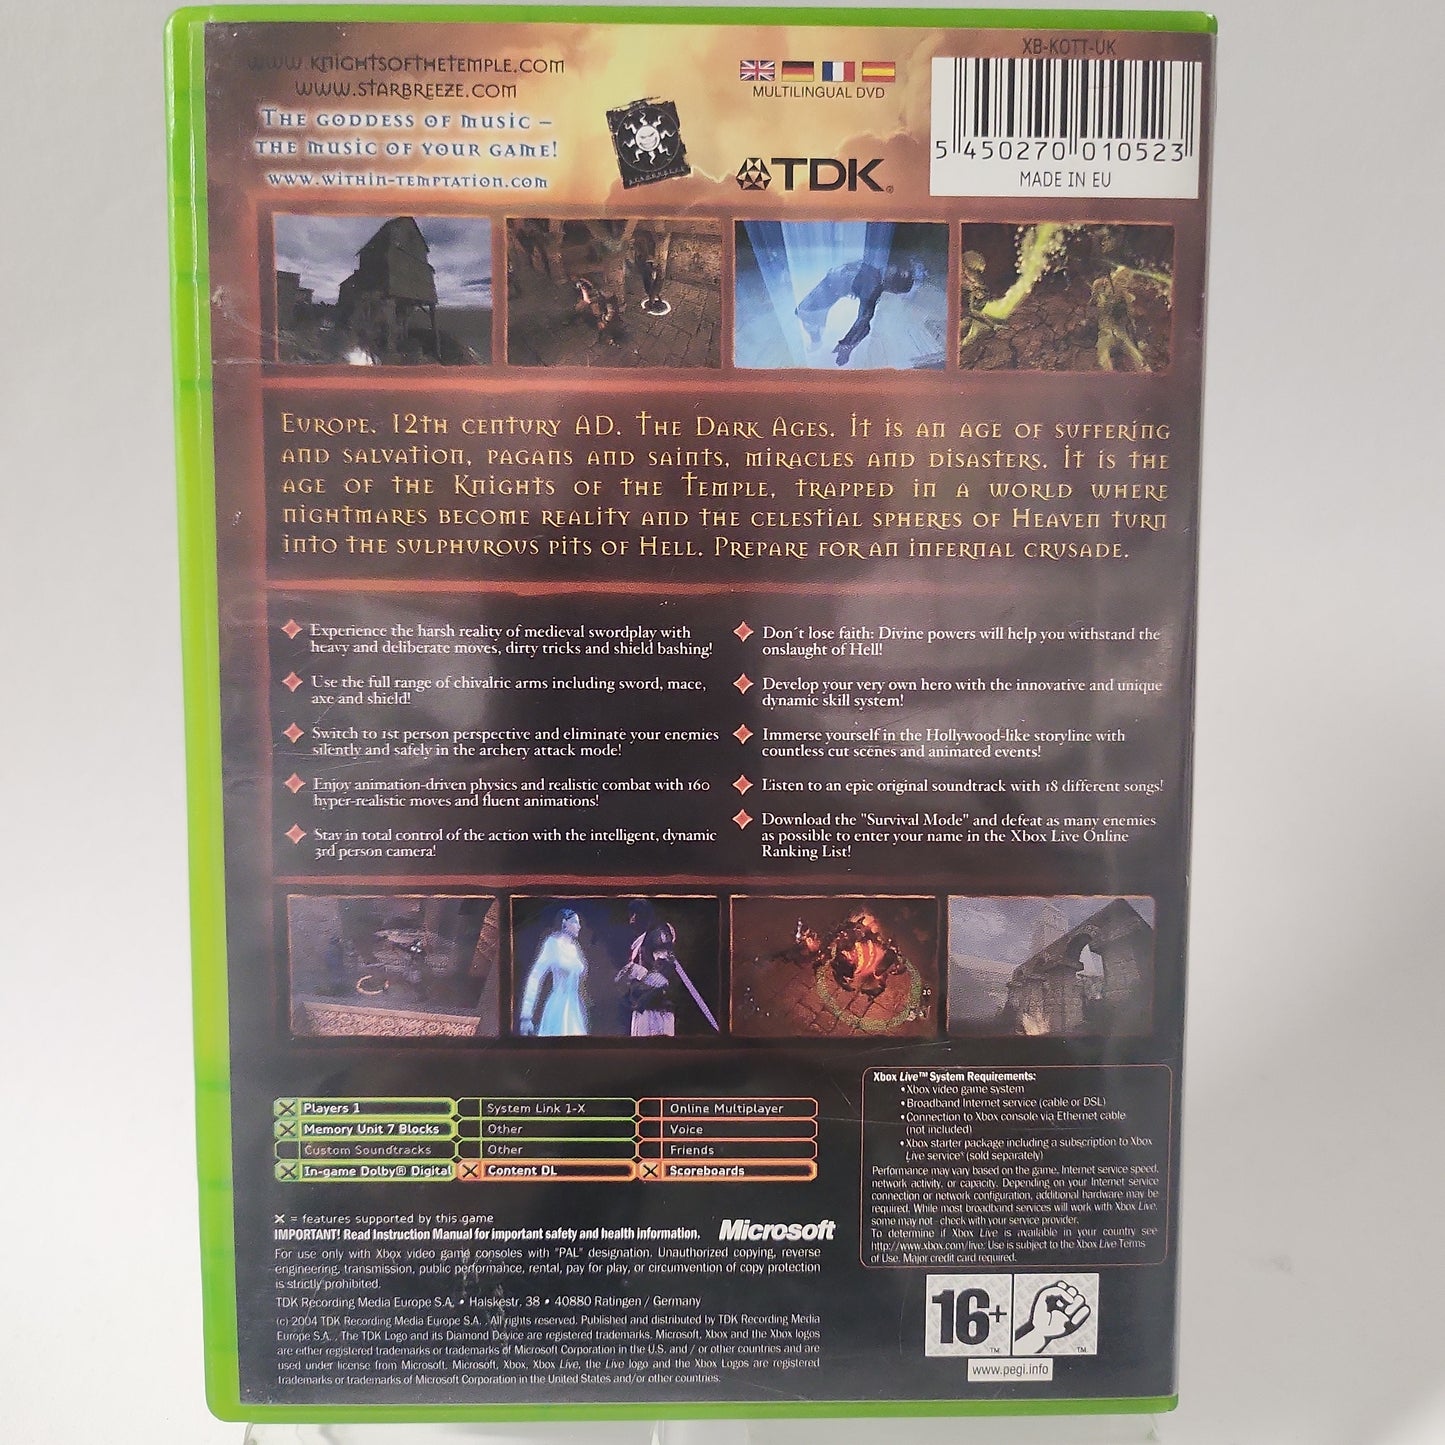 Knight of the Temple Infernal Crusade Xbox Original